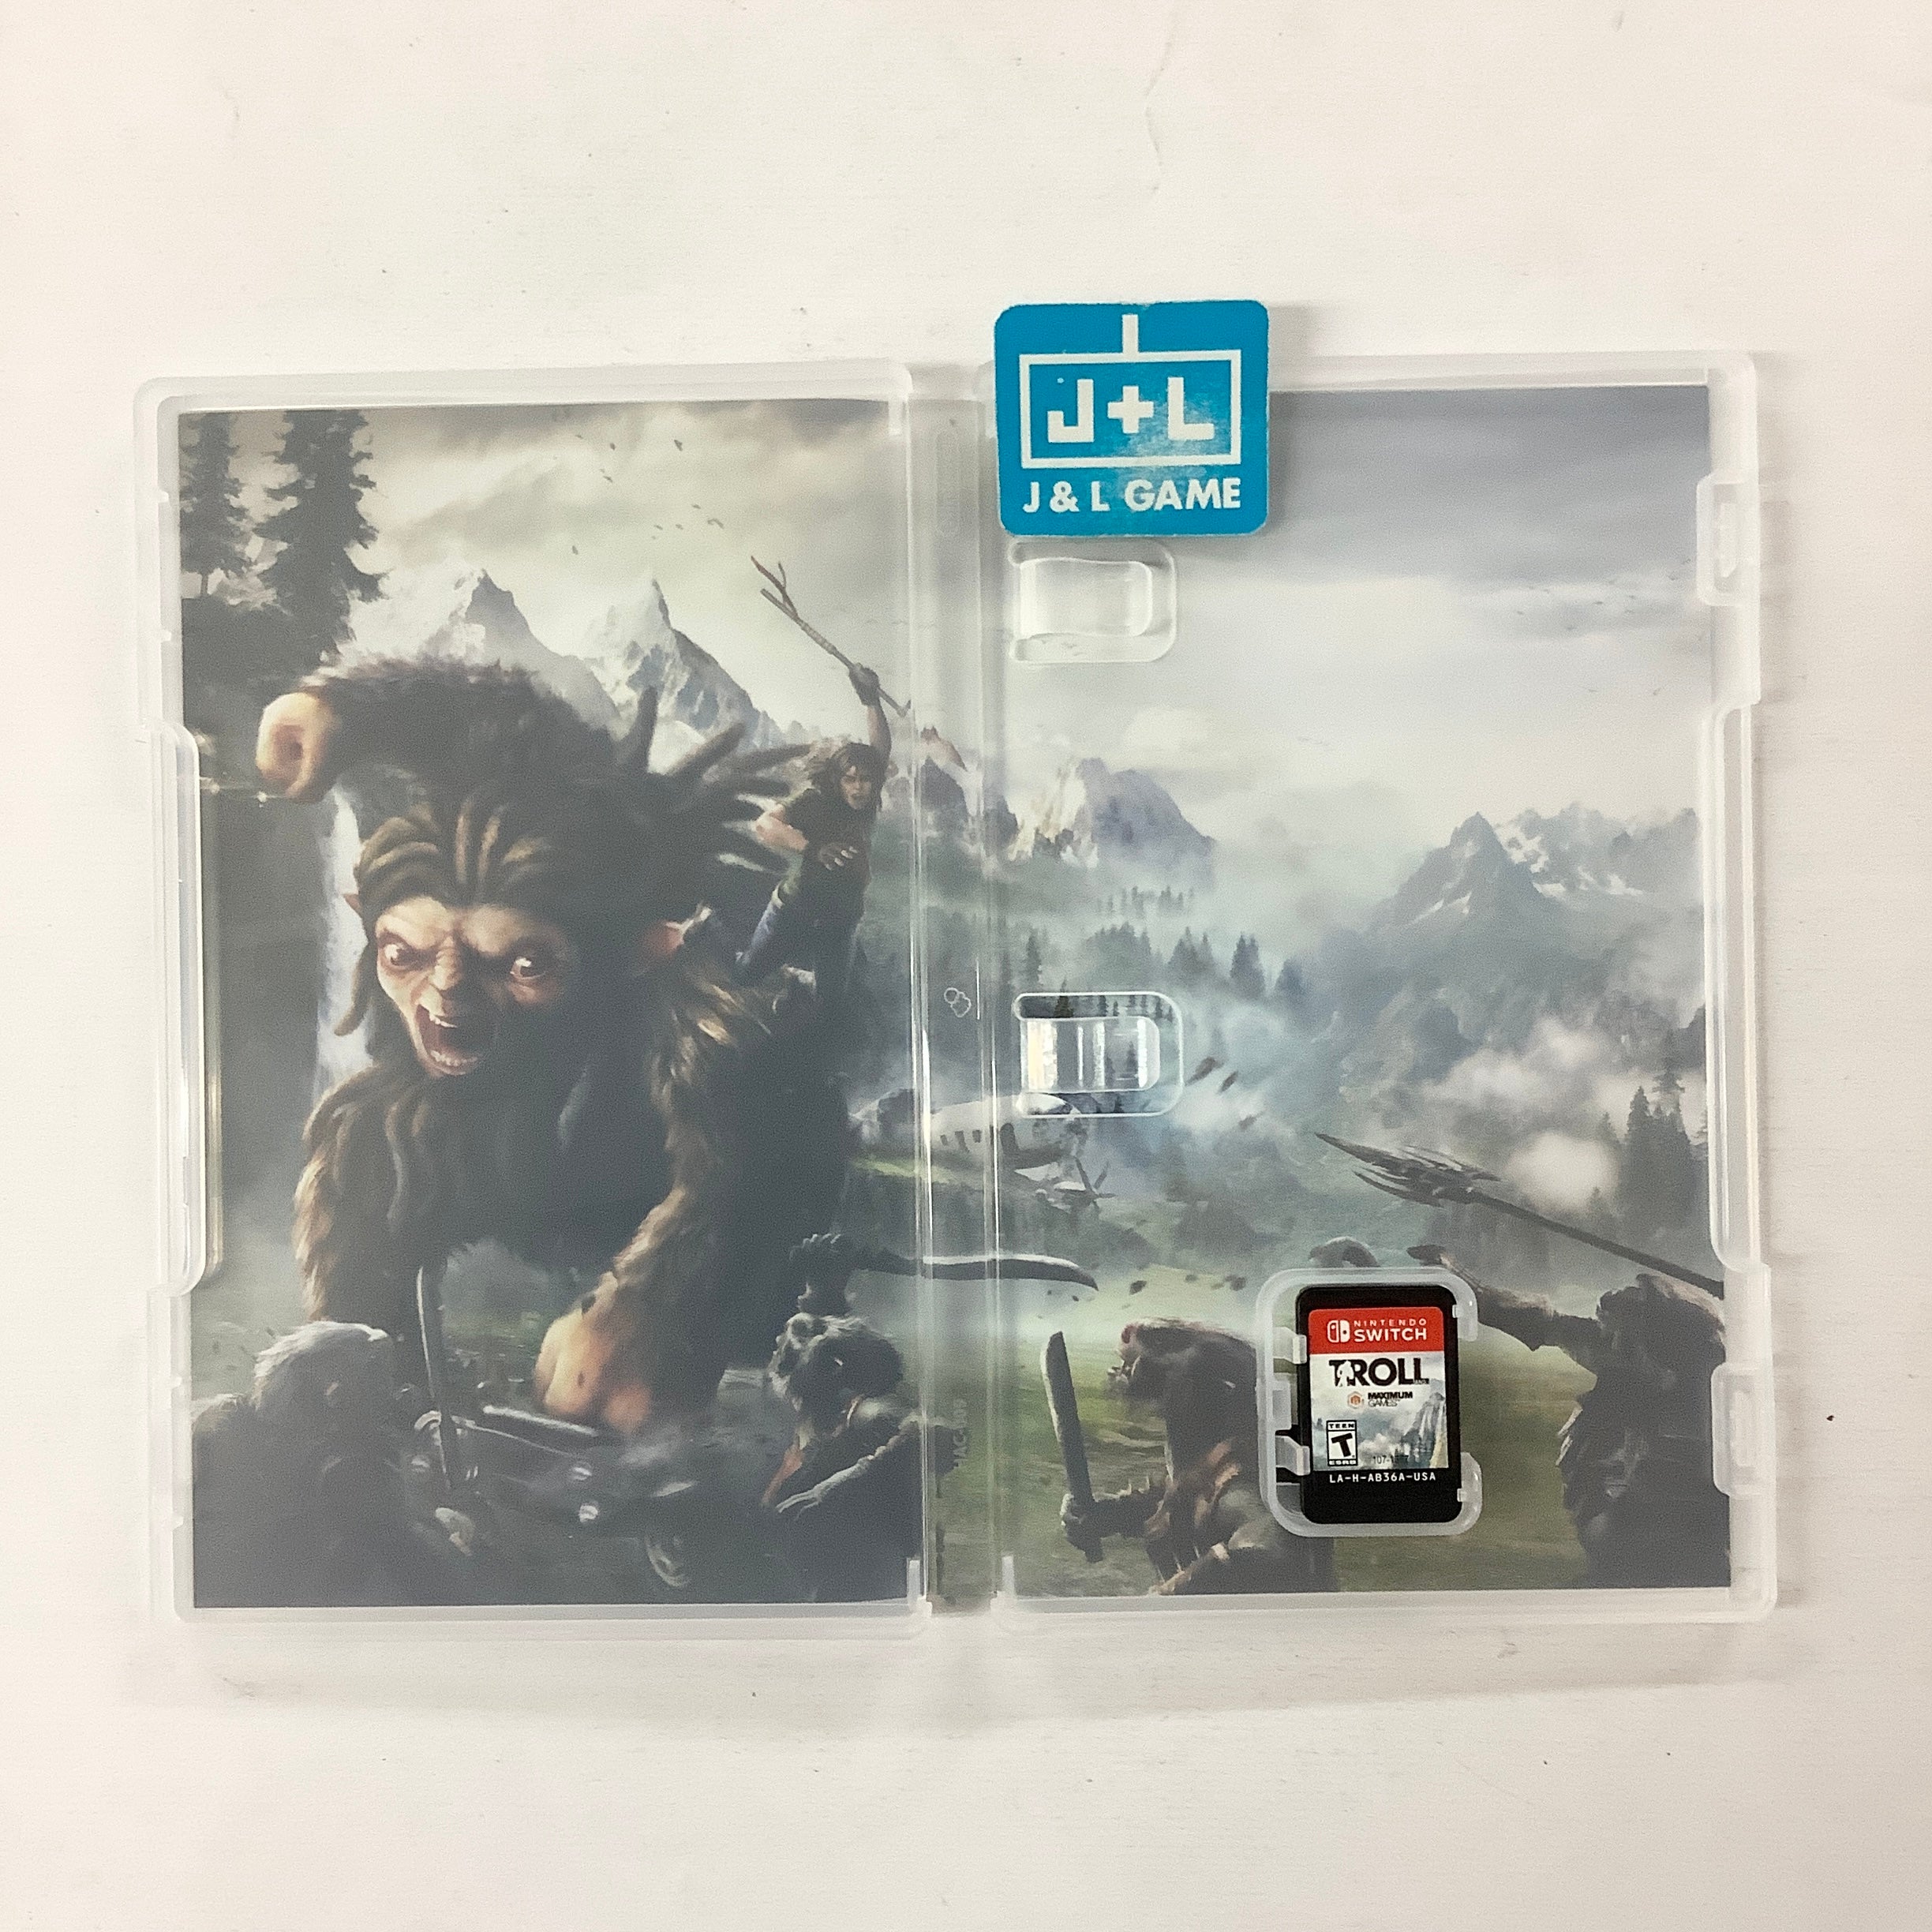 Troll and I - (NSW) Nintendo Switch [Pre-Owned] Video Games Maximum Games   